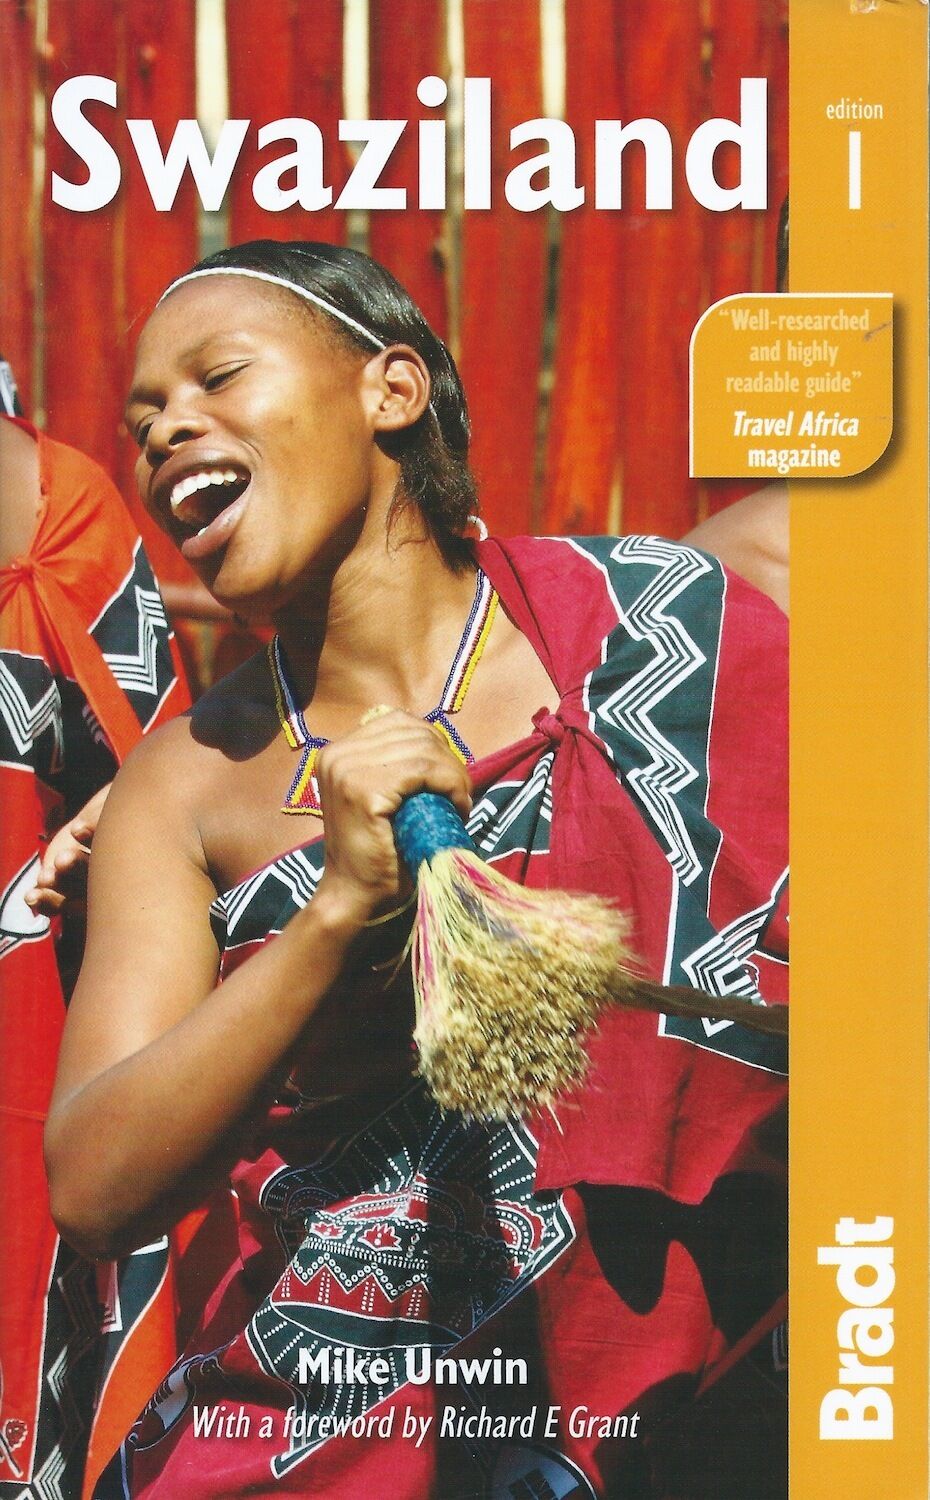 Bradt Swaziland travel guide paperback FREE SHIPOING